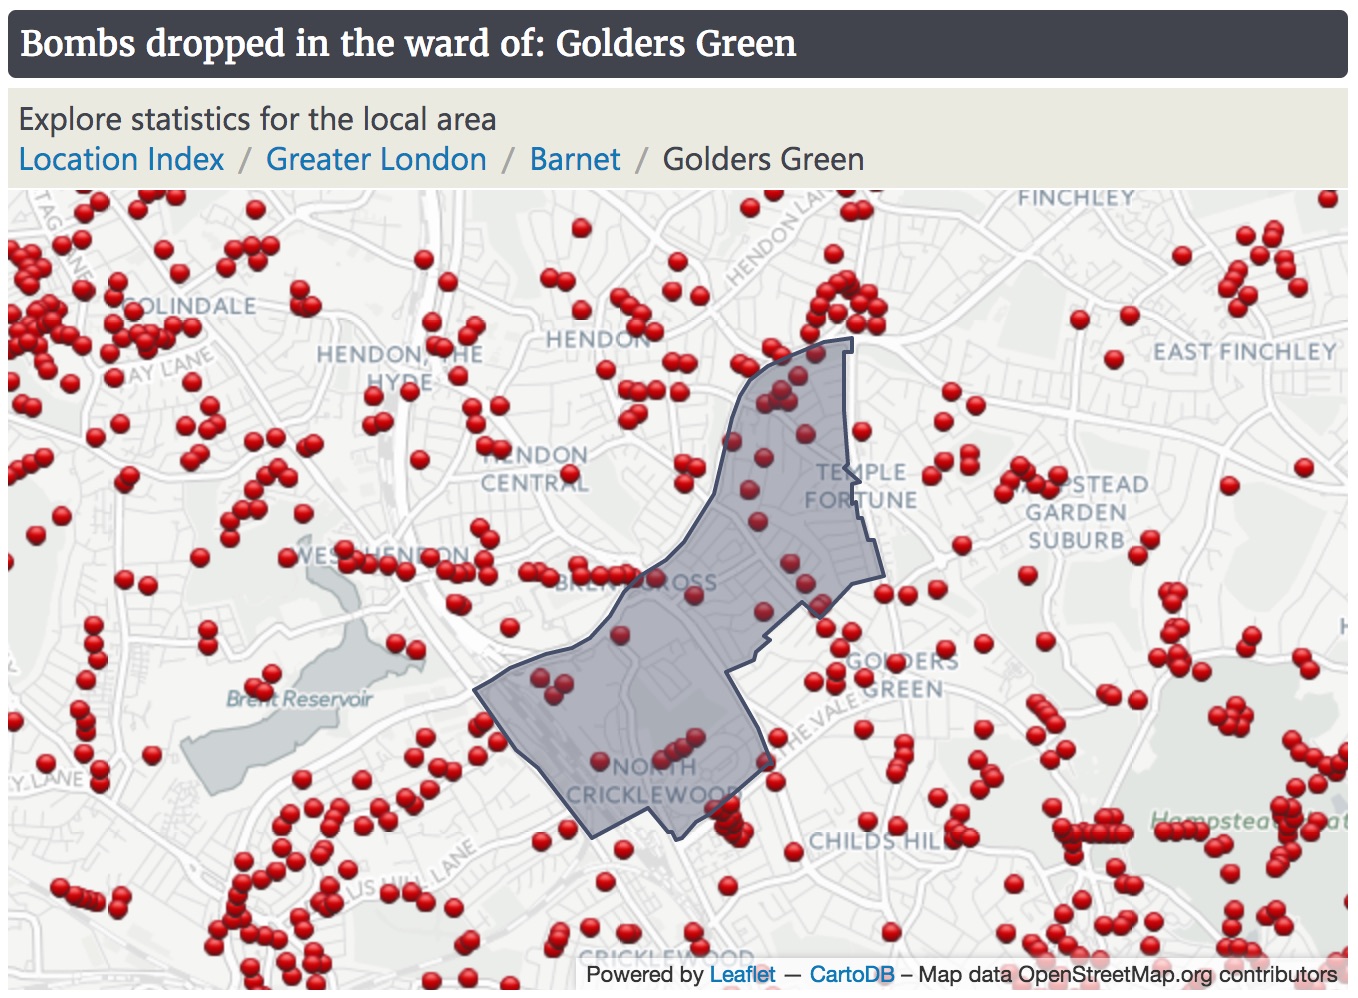 Map of the area in North London where Granddad lived when he was a wee boy. The map shows where the bombs dropped